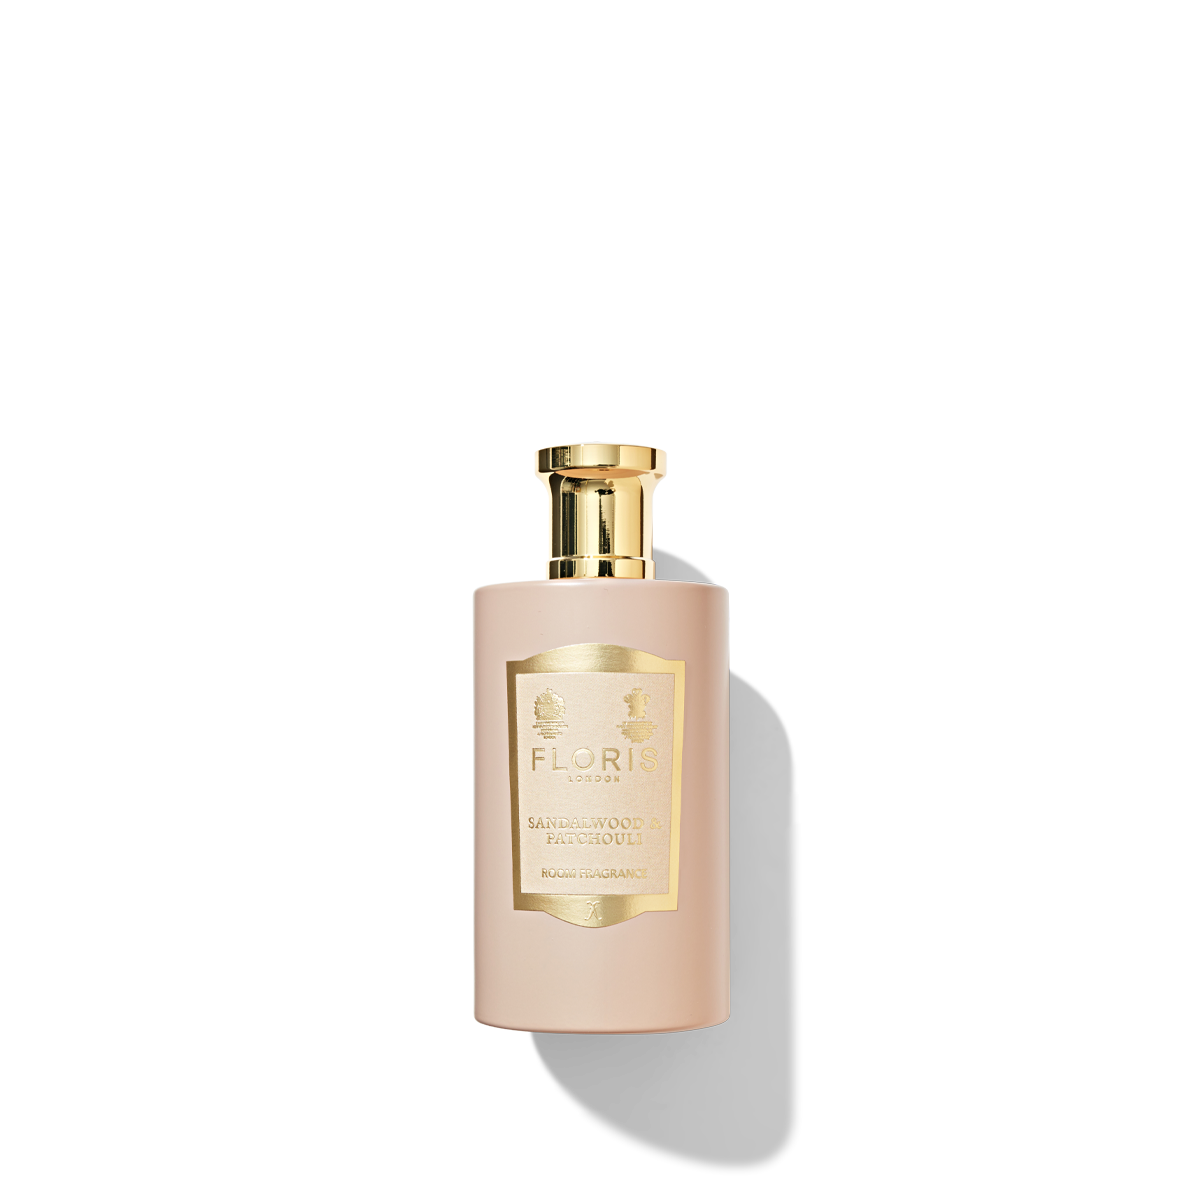 Light pink coloured bottle with a gold cap containing the sandalwood and patchouli room fragrance.